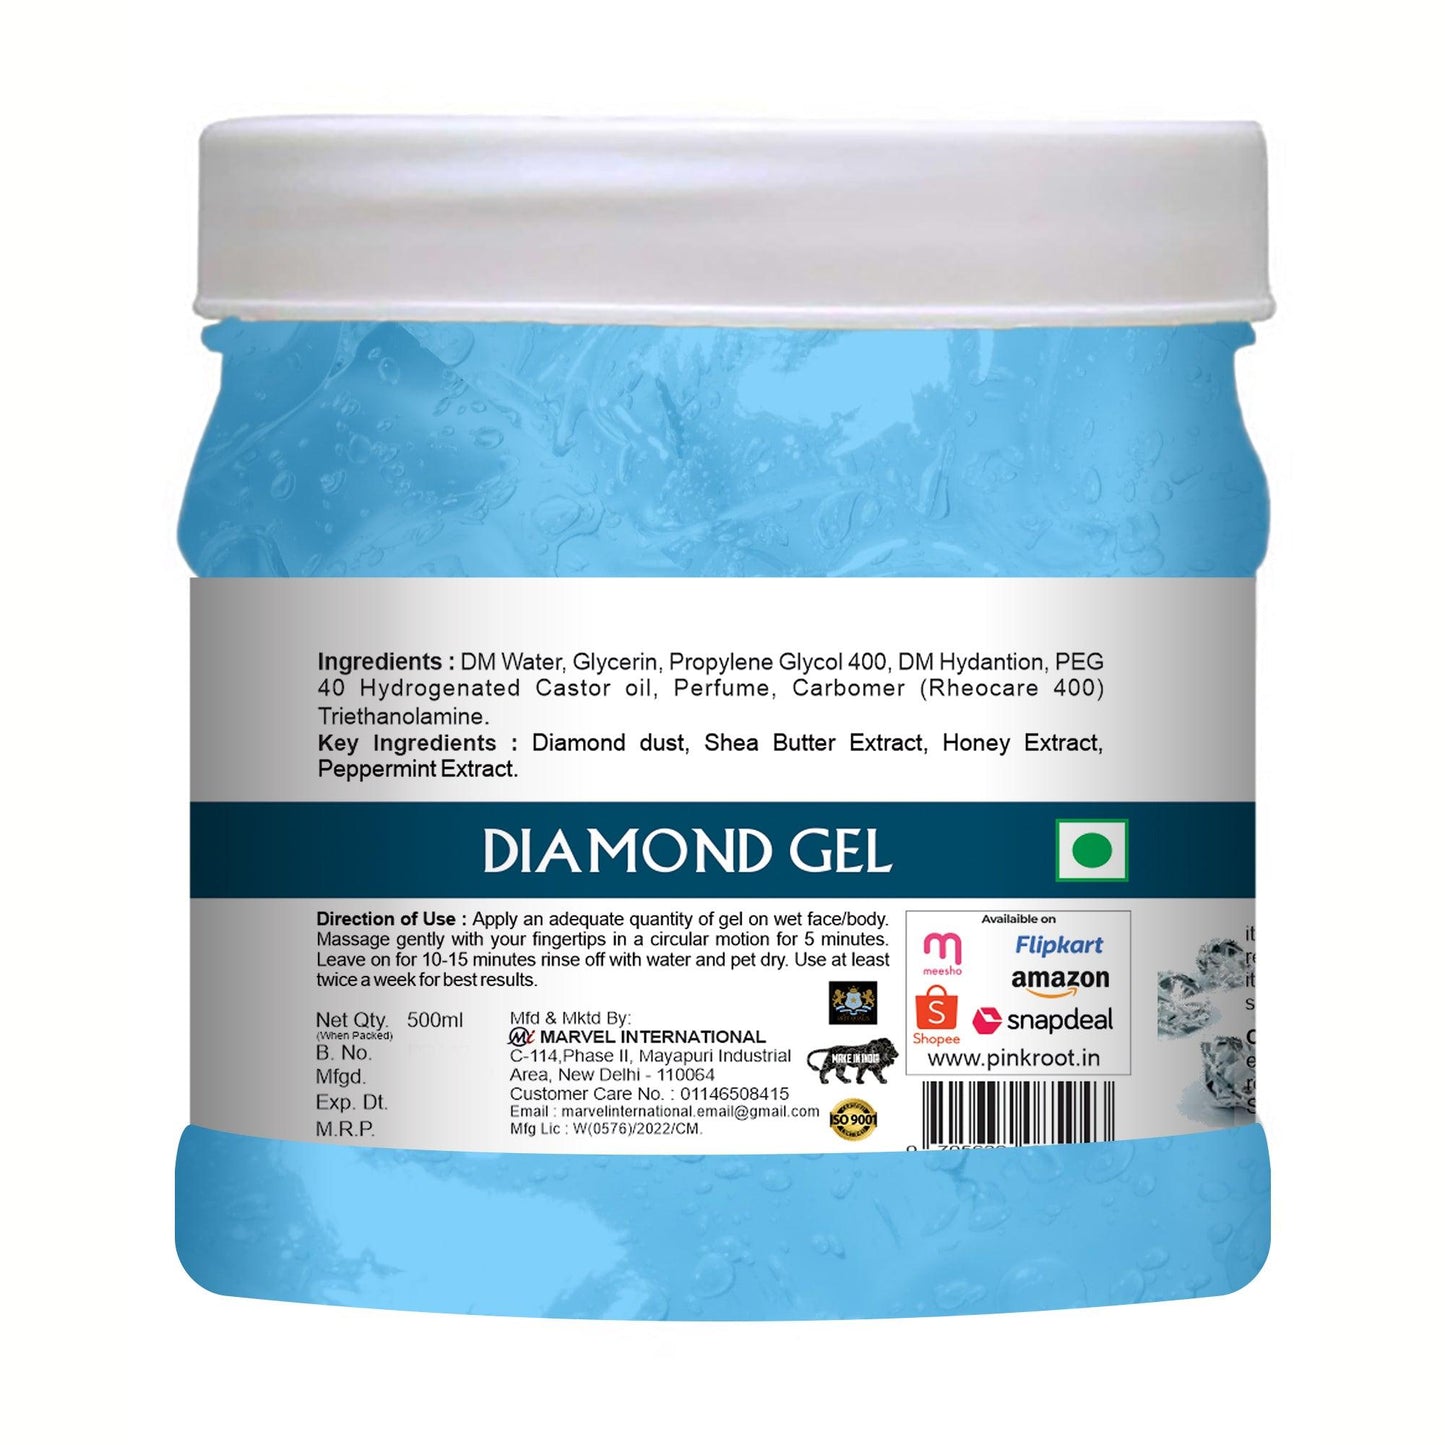 Diamond Gel 500ml enriched with Aloe vera Extract - Pink Root